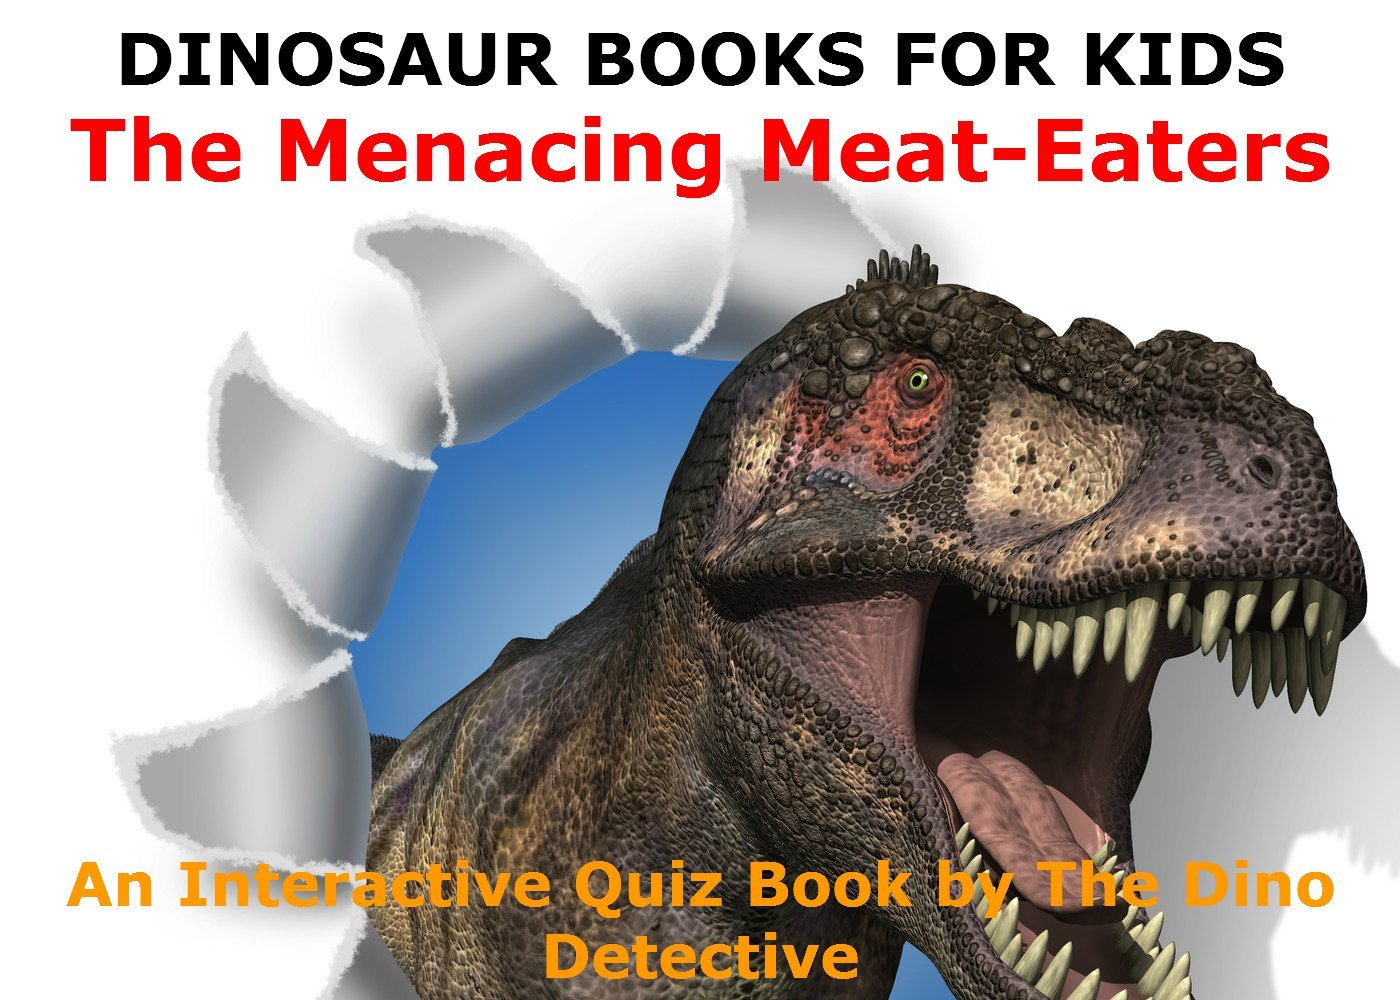 FREE: Dinosaur Books For Kids-The Menacing Meat-Eaters by Barry Huhn